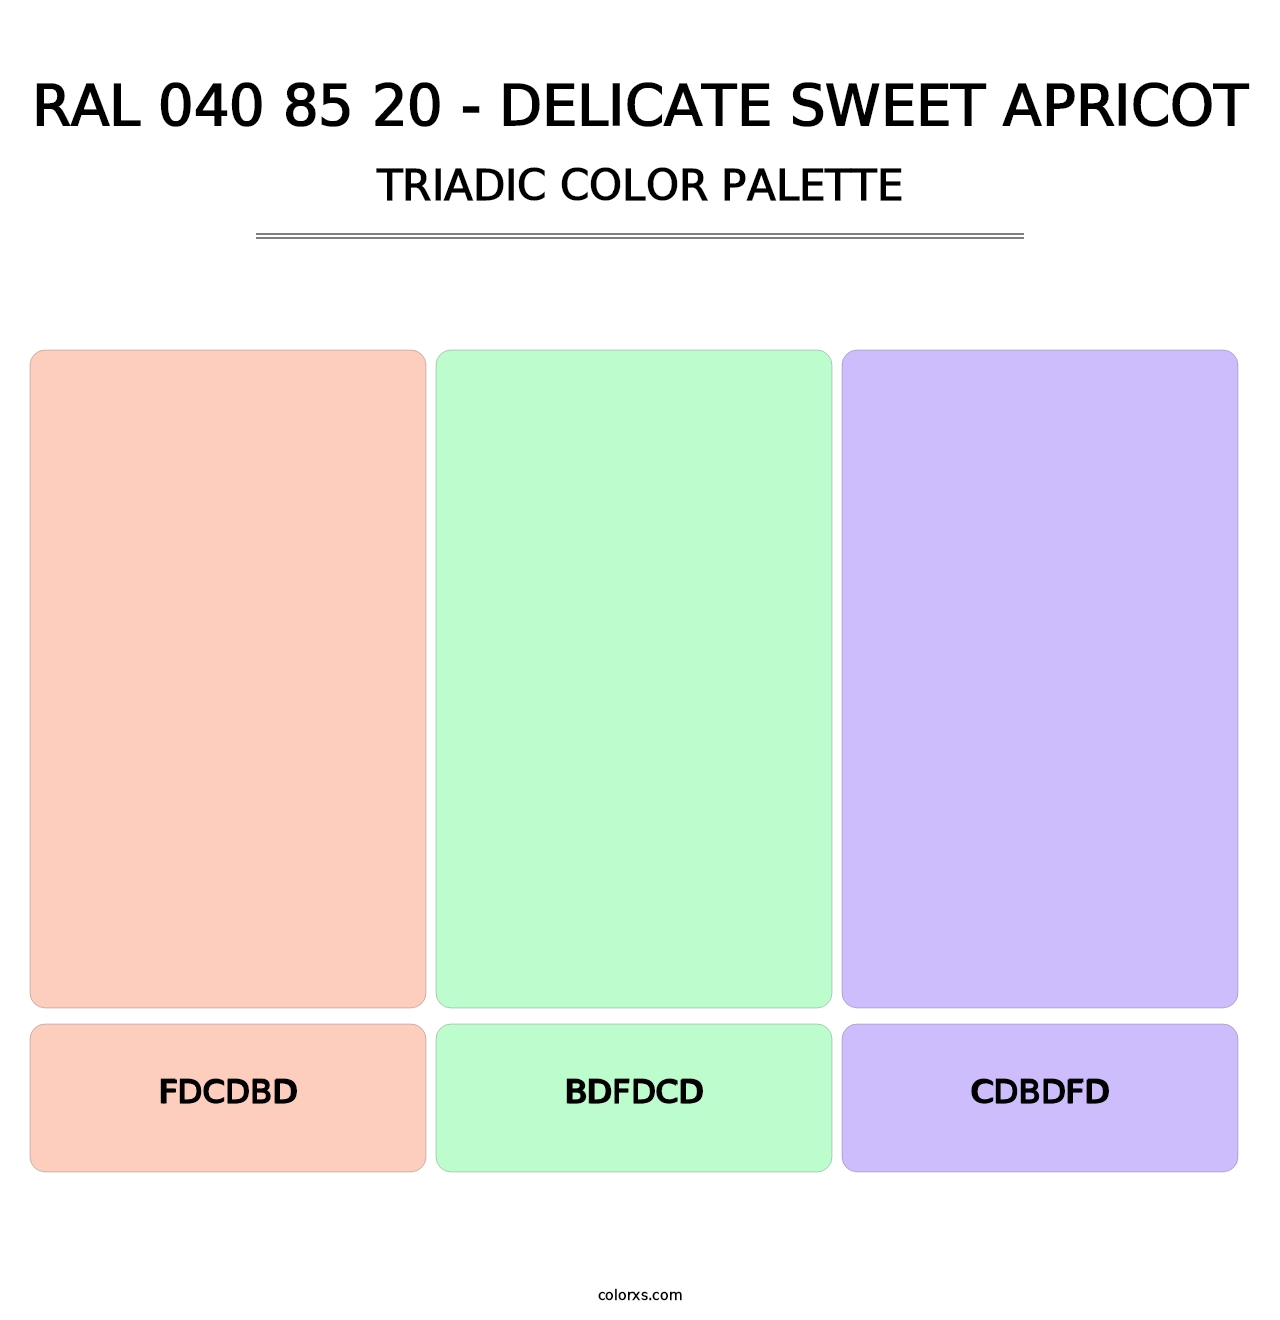 RAL 040 85 20 - Delicate Sweet Apricot - Triadic Color Palette